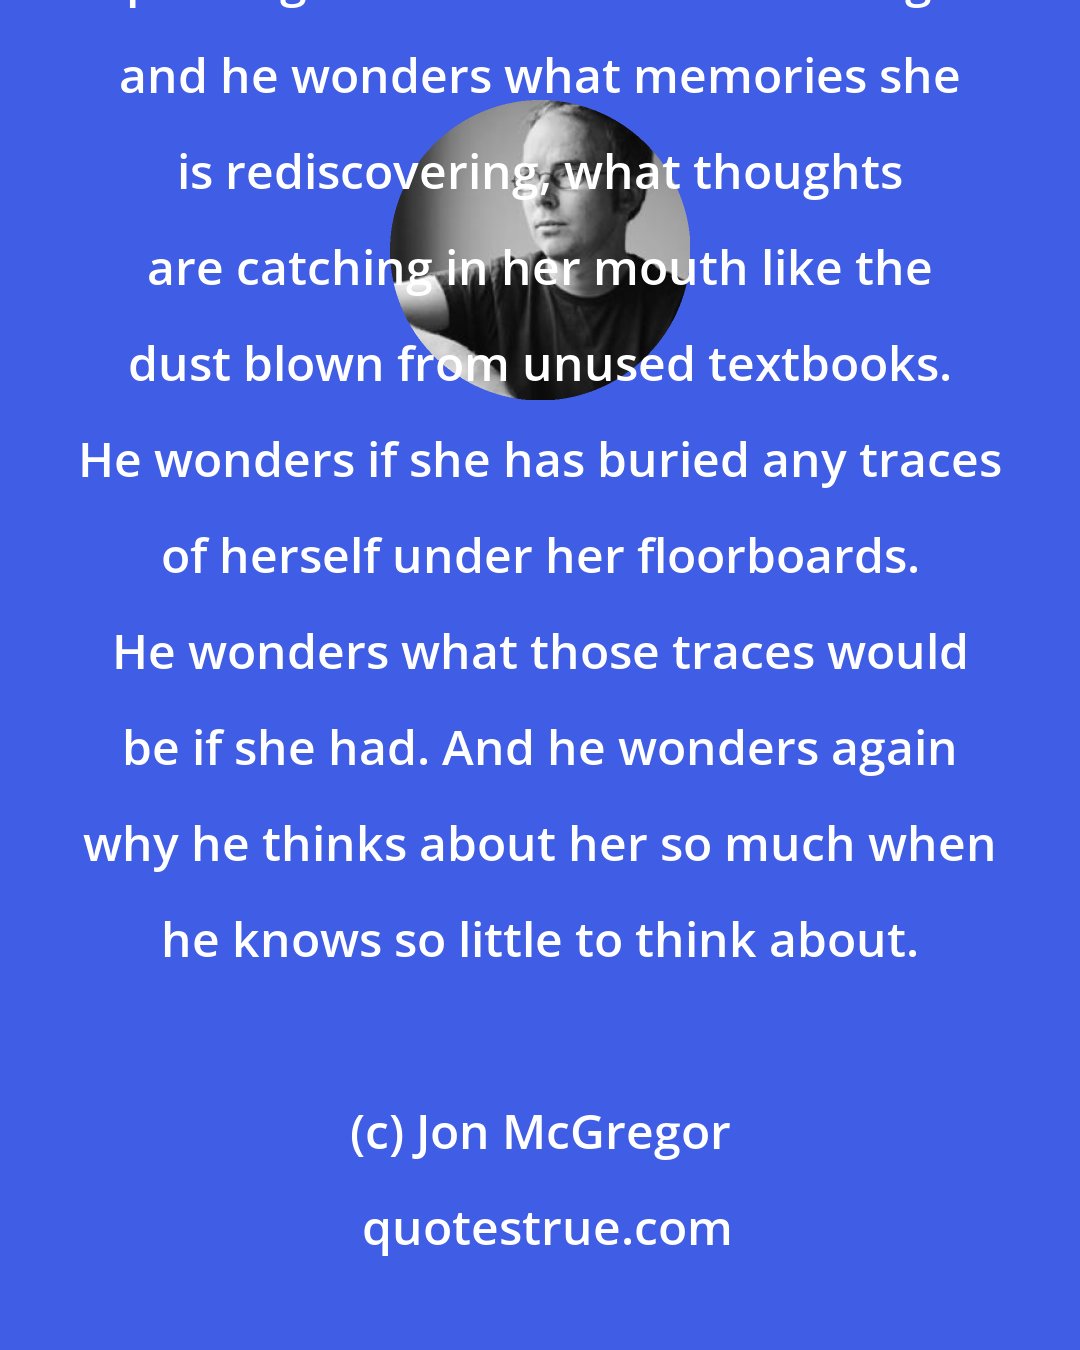 Jon McGregor: He thinks about her, at this moment, in her house, a few thin walls away, packing her life into boxes and bags and he wonders what memories she is rediscovering, what thoughts are catching in her mouth like the dust blown from unused textbooks. He wonders if she has buried any traces of herself under her floorboards. He wonders what those traces would be if she had. And he wonders again why he thinks about her so much when he knows so little to think about.